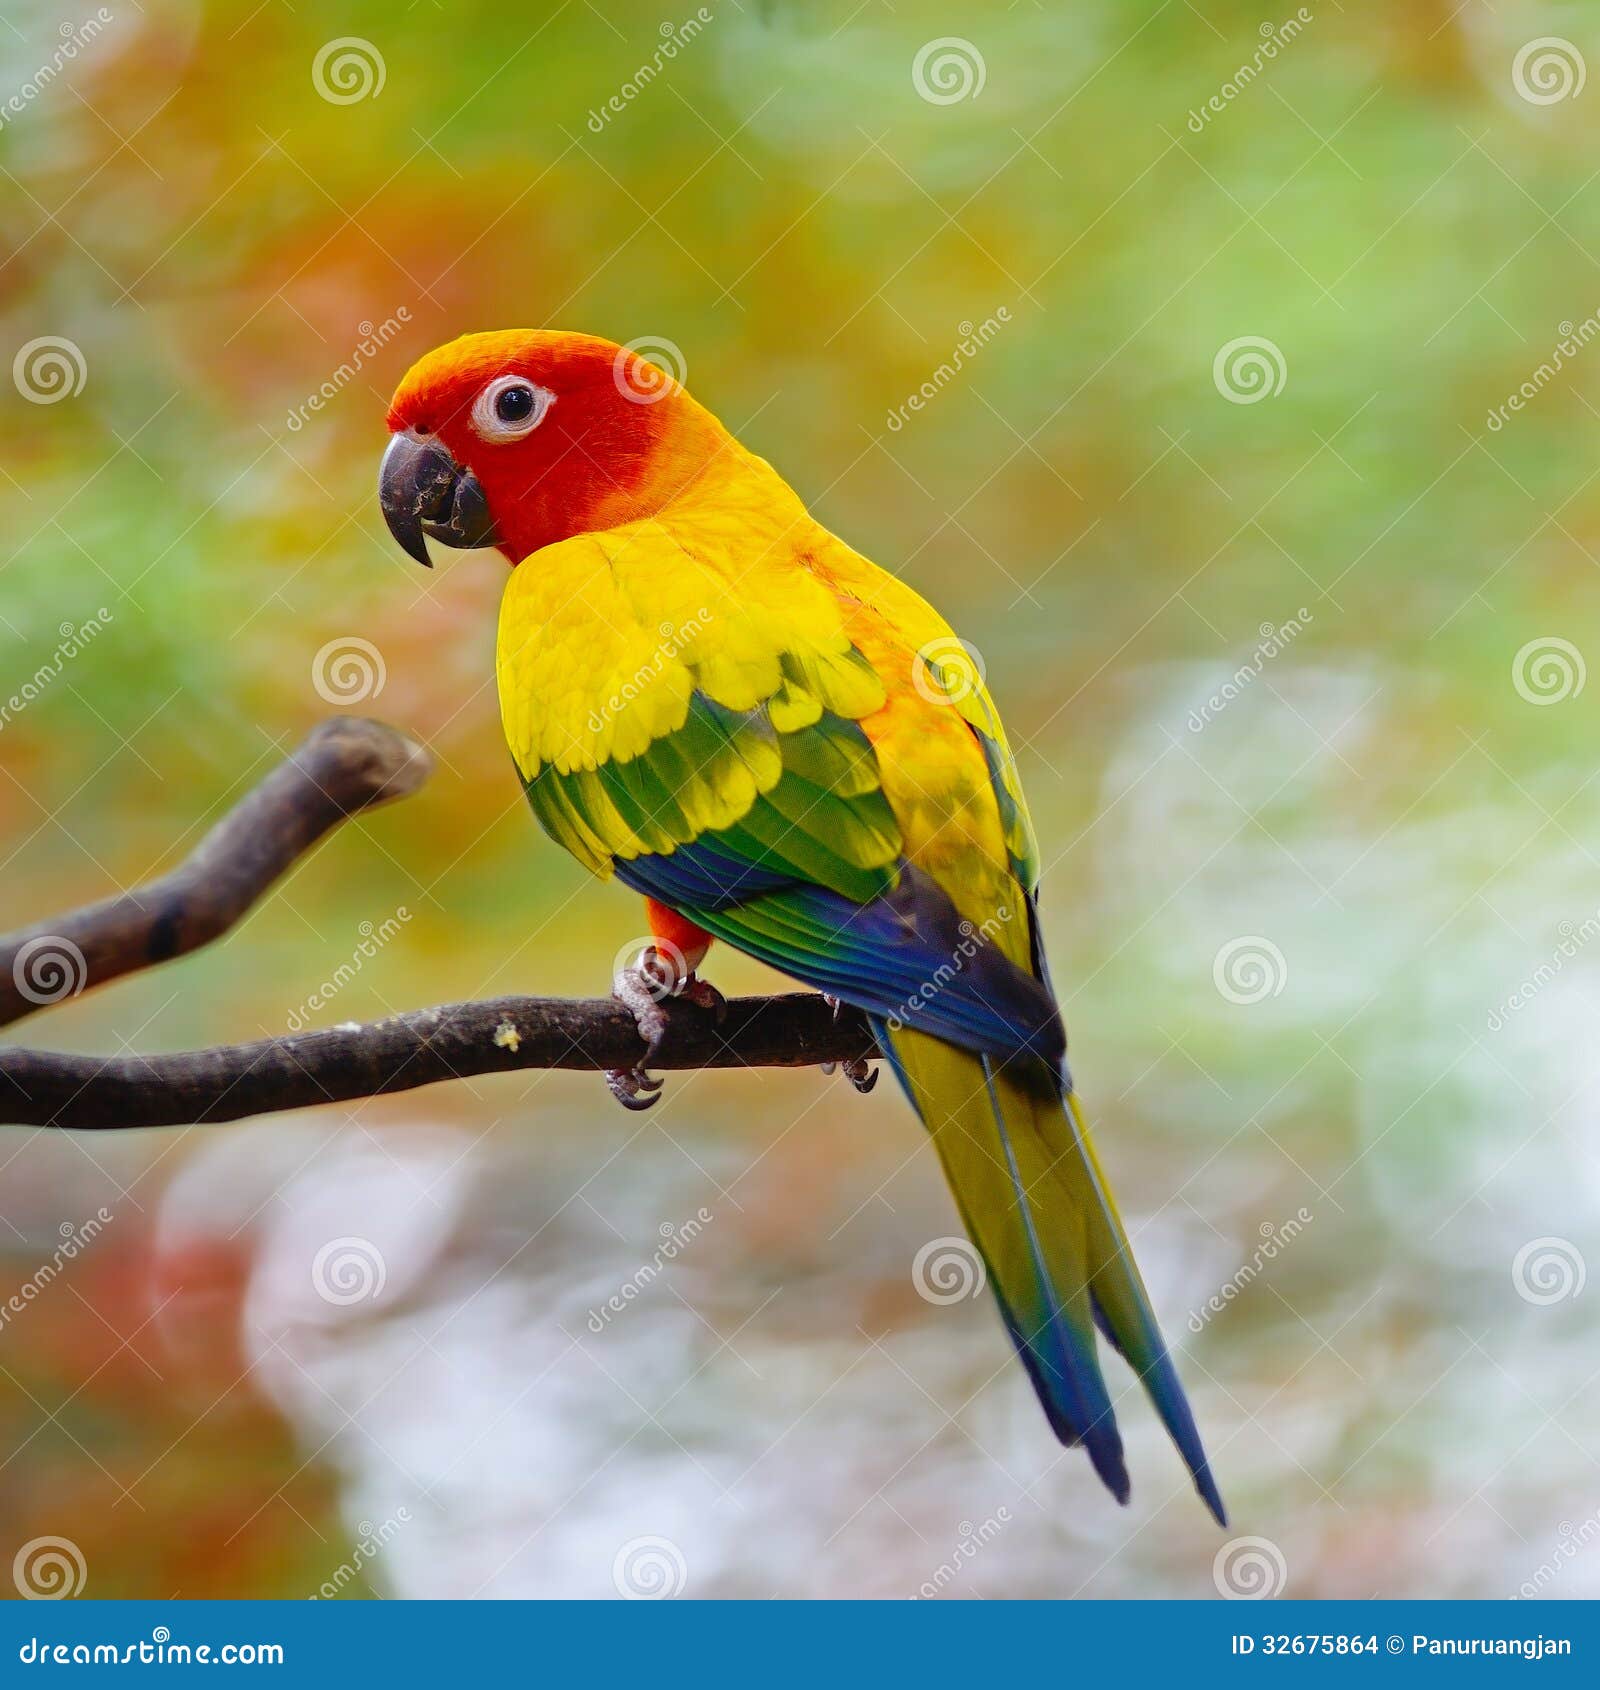 Sun Conure Stock Images - Image: 32675864